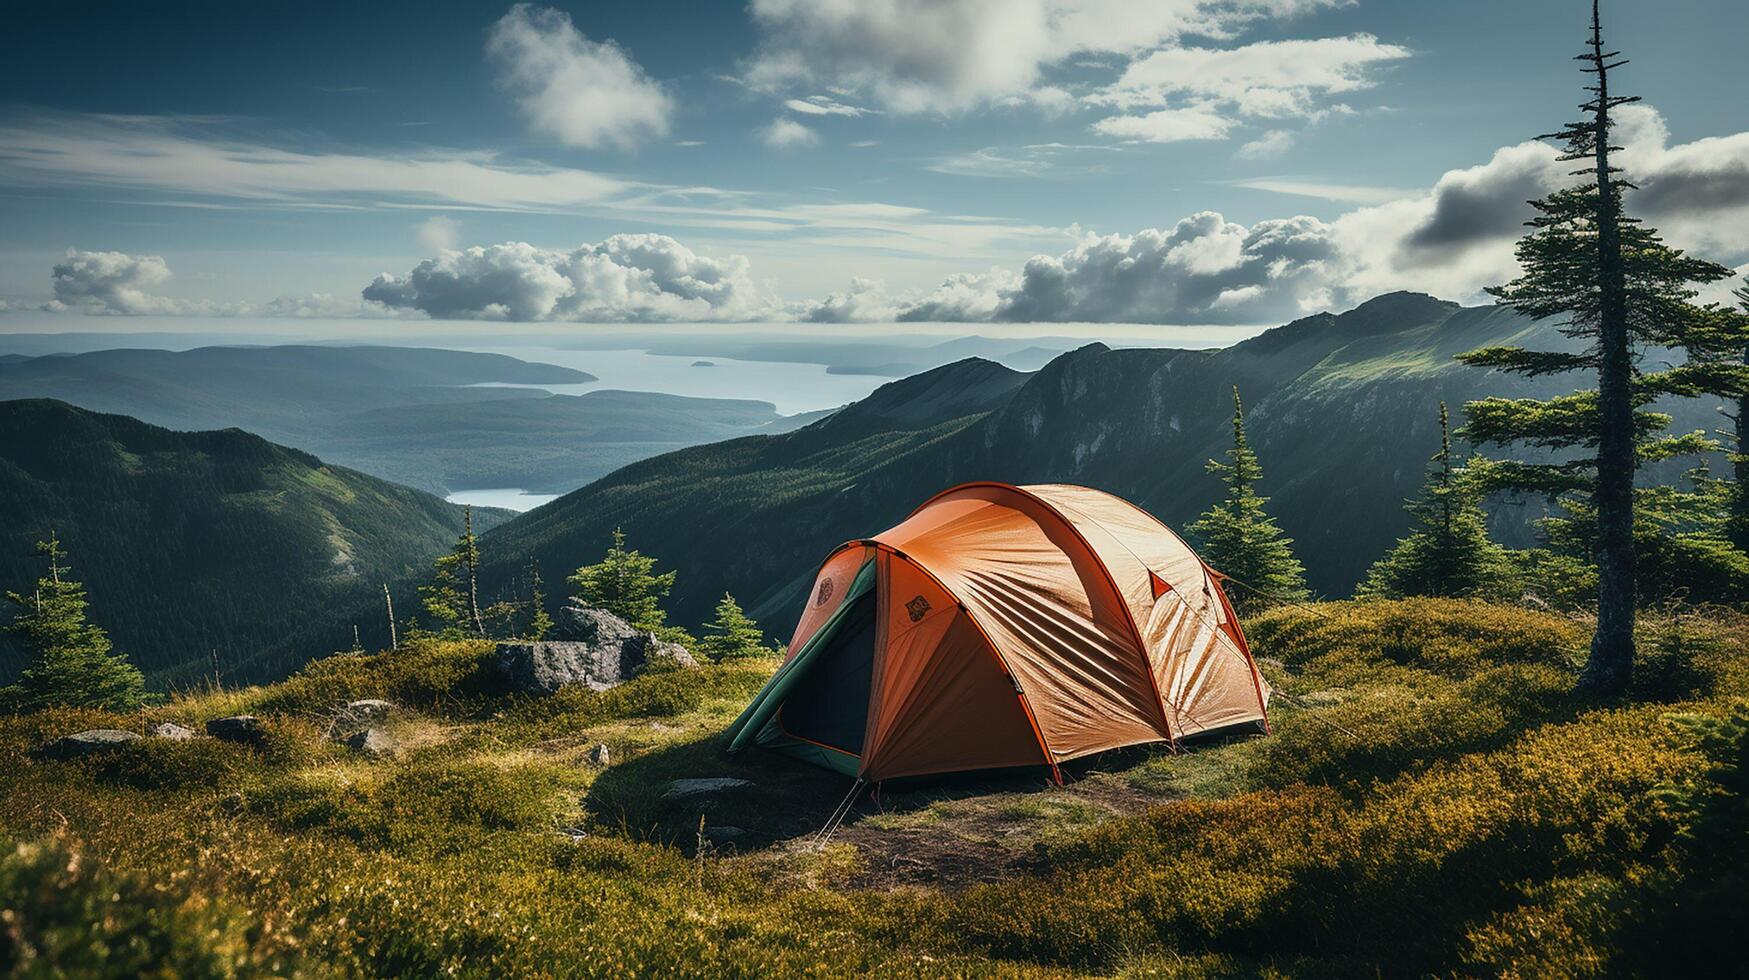 AI generated Awesome camping in top of mountain. Lonely Green tent is hidden in a mountain forest among red dwarf birch bushes. Tourism concept adventure voyage outdoor photo